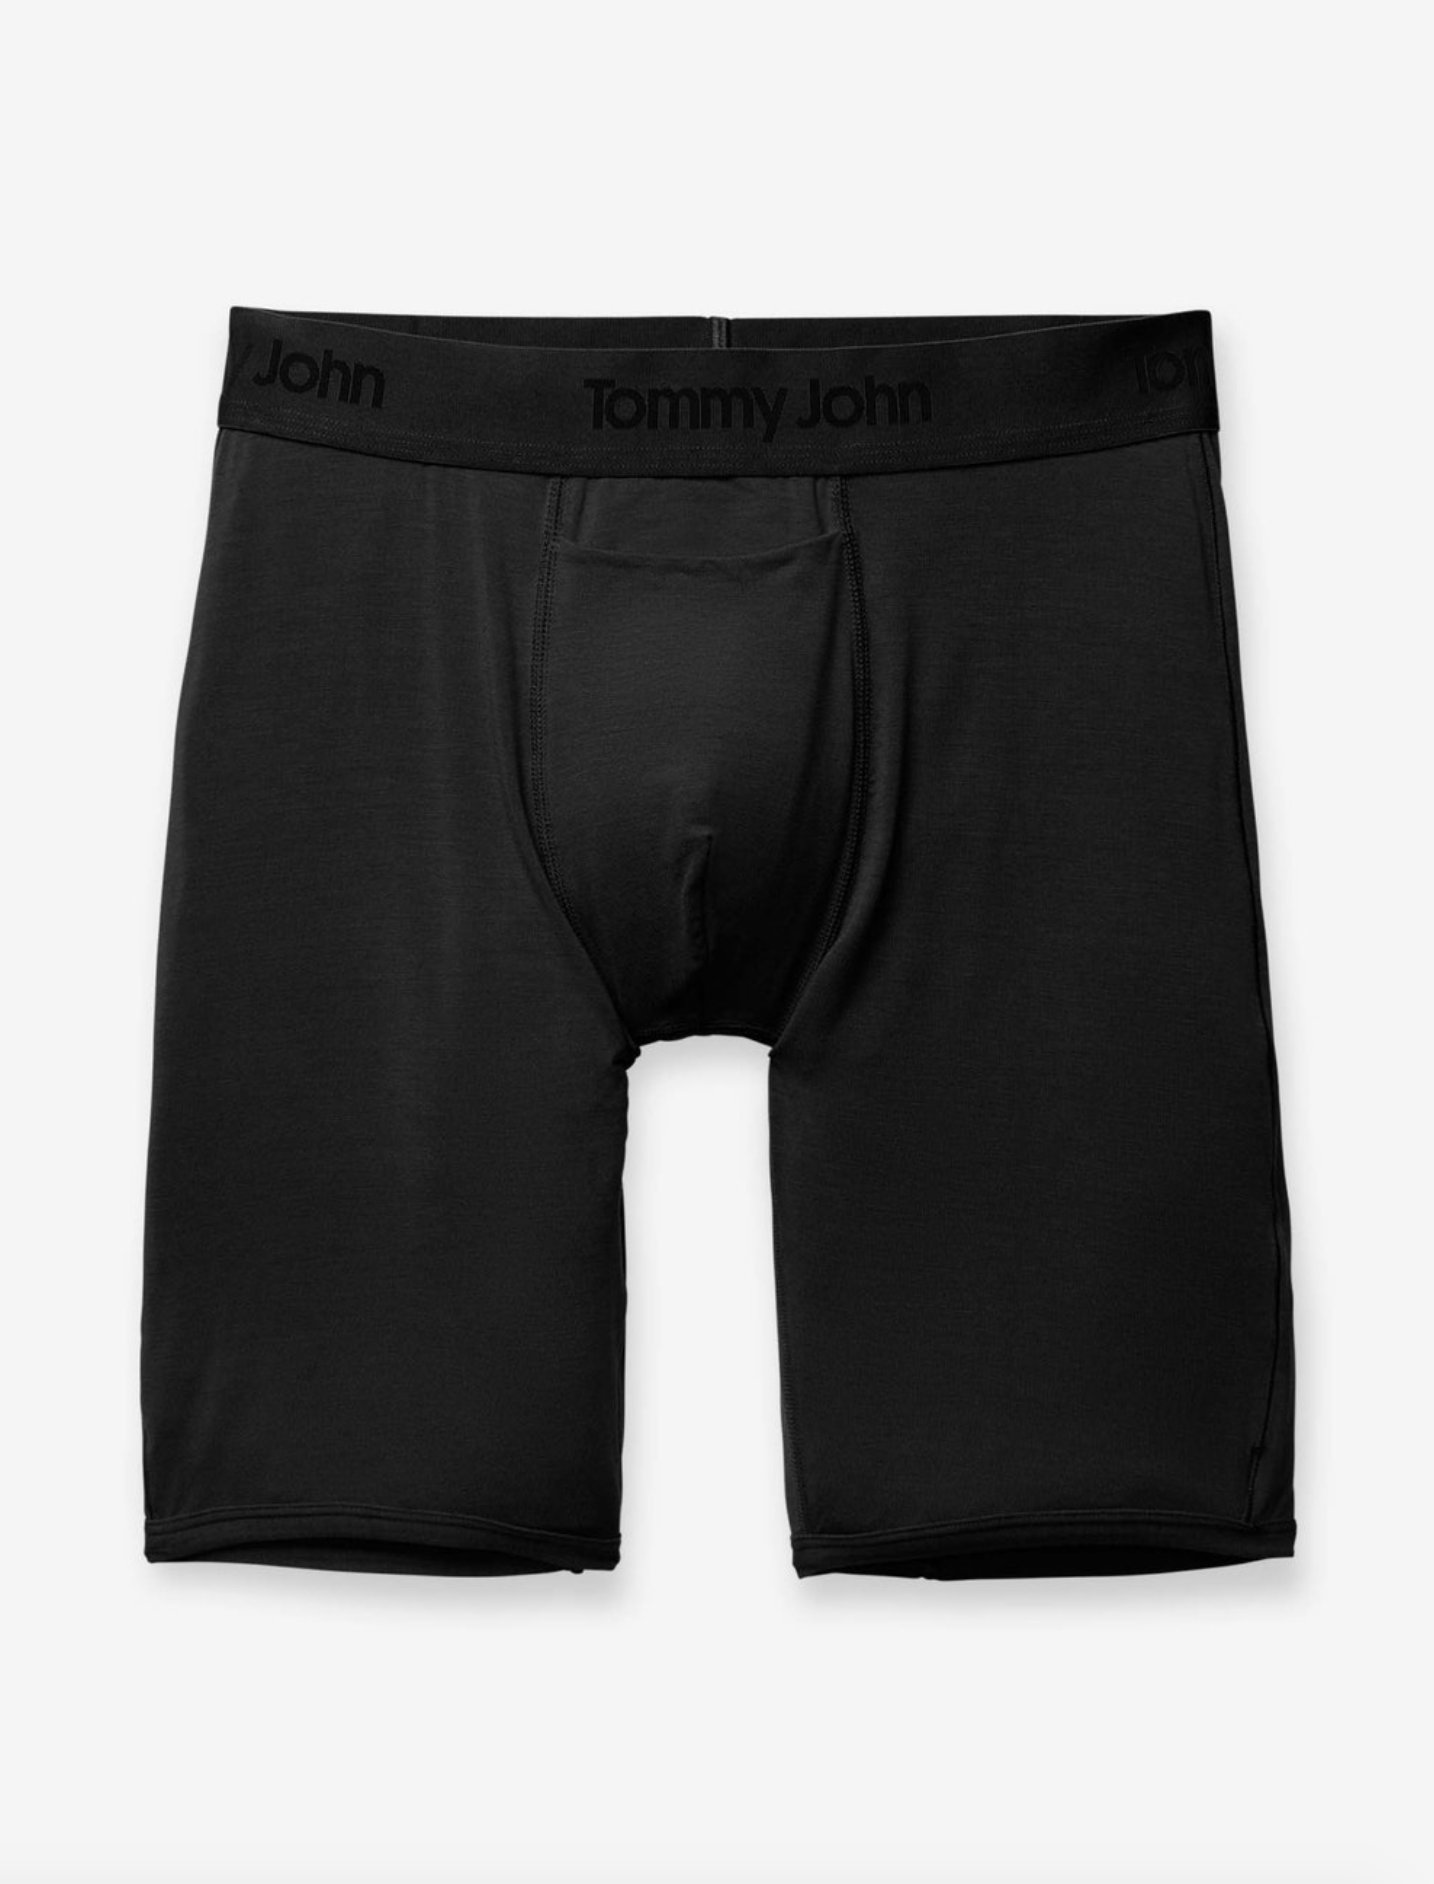 Tommy John | Second Skin Boxer Brief